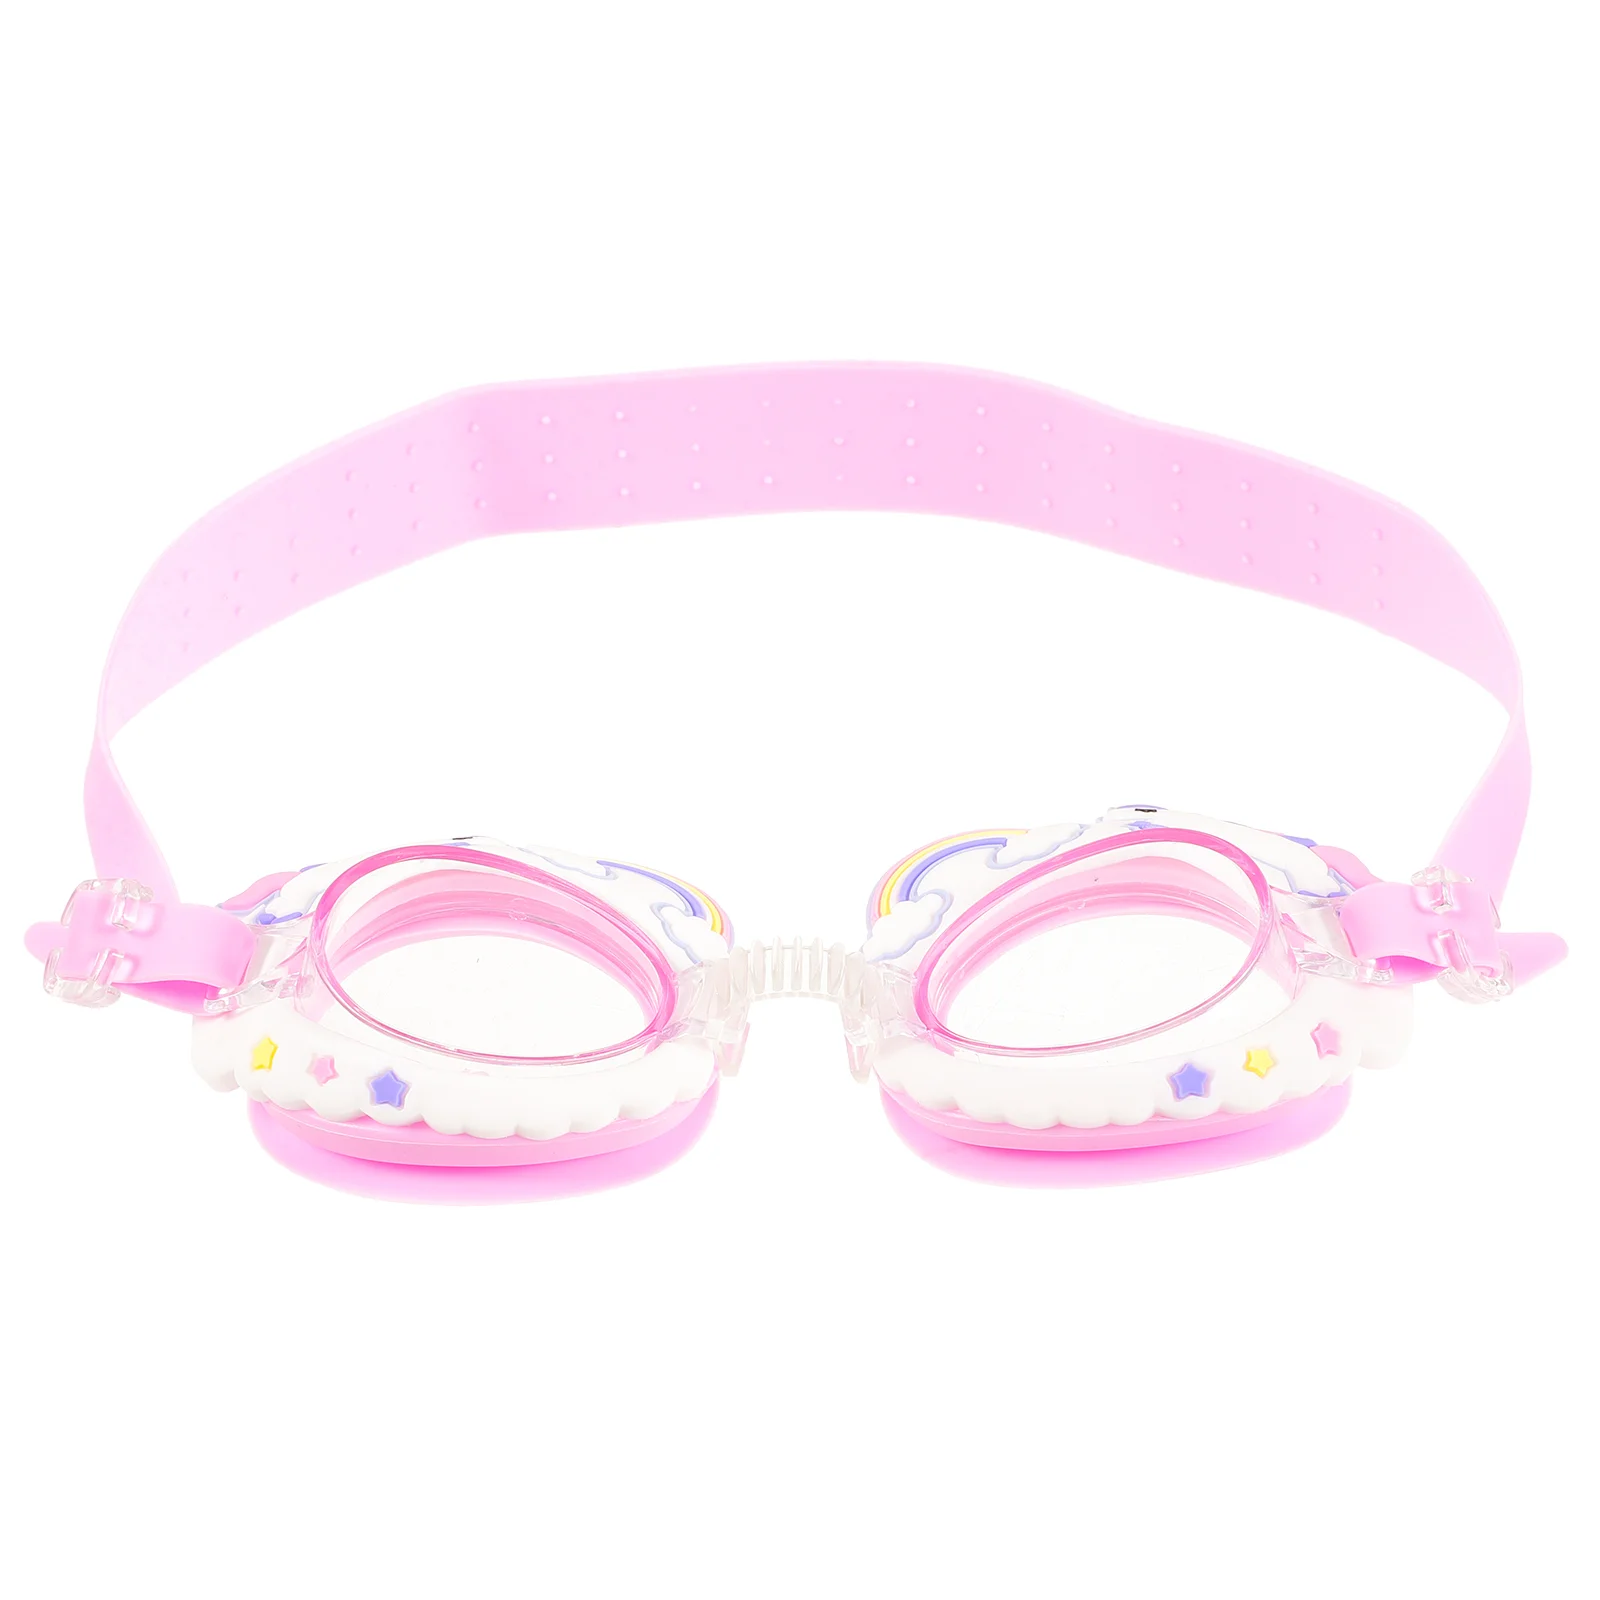 Children's Swimming Goggles Girls' Cute Cartoon Animals Waterproof Pink Rainbow Horse Toddler for Kids Silica Gel girls sandals genuine leather white straps pink red open toe flowers summer shoes kids chaussure zapato nina toddler bare foot